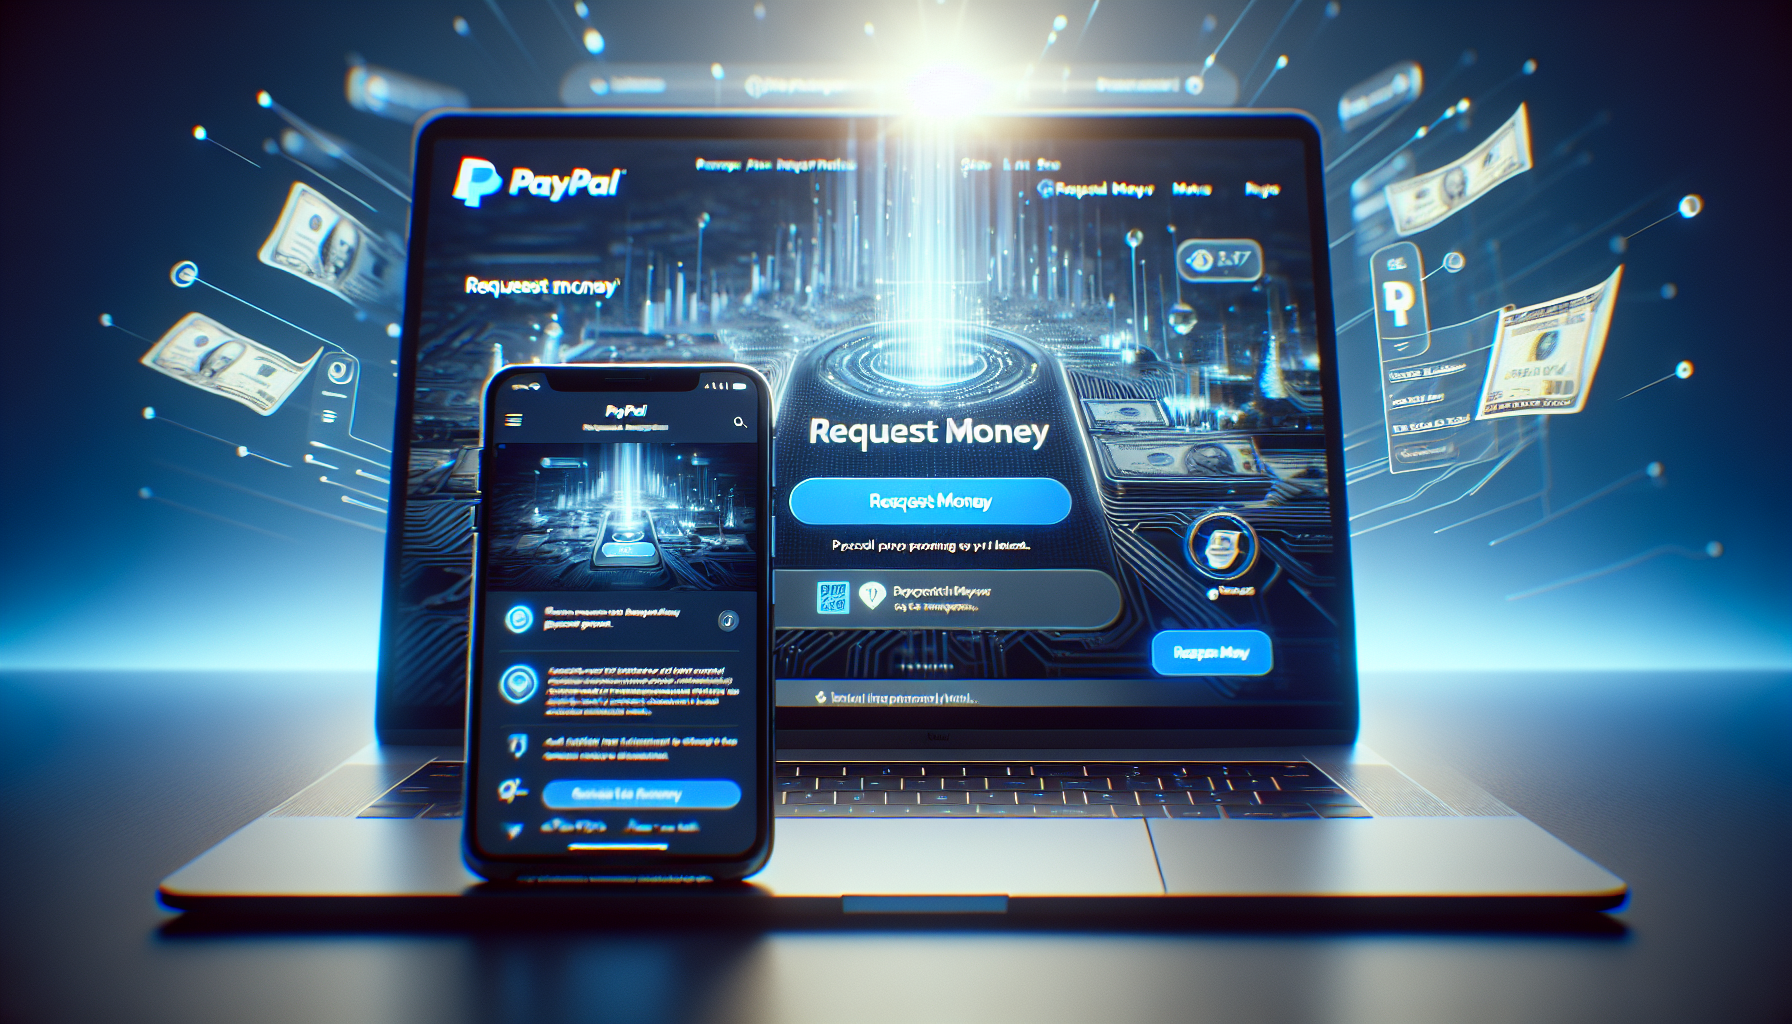 How to Request Money on PayPal – Step-by-Step Guide